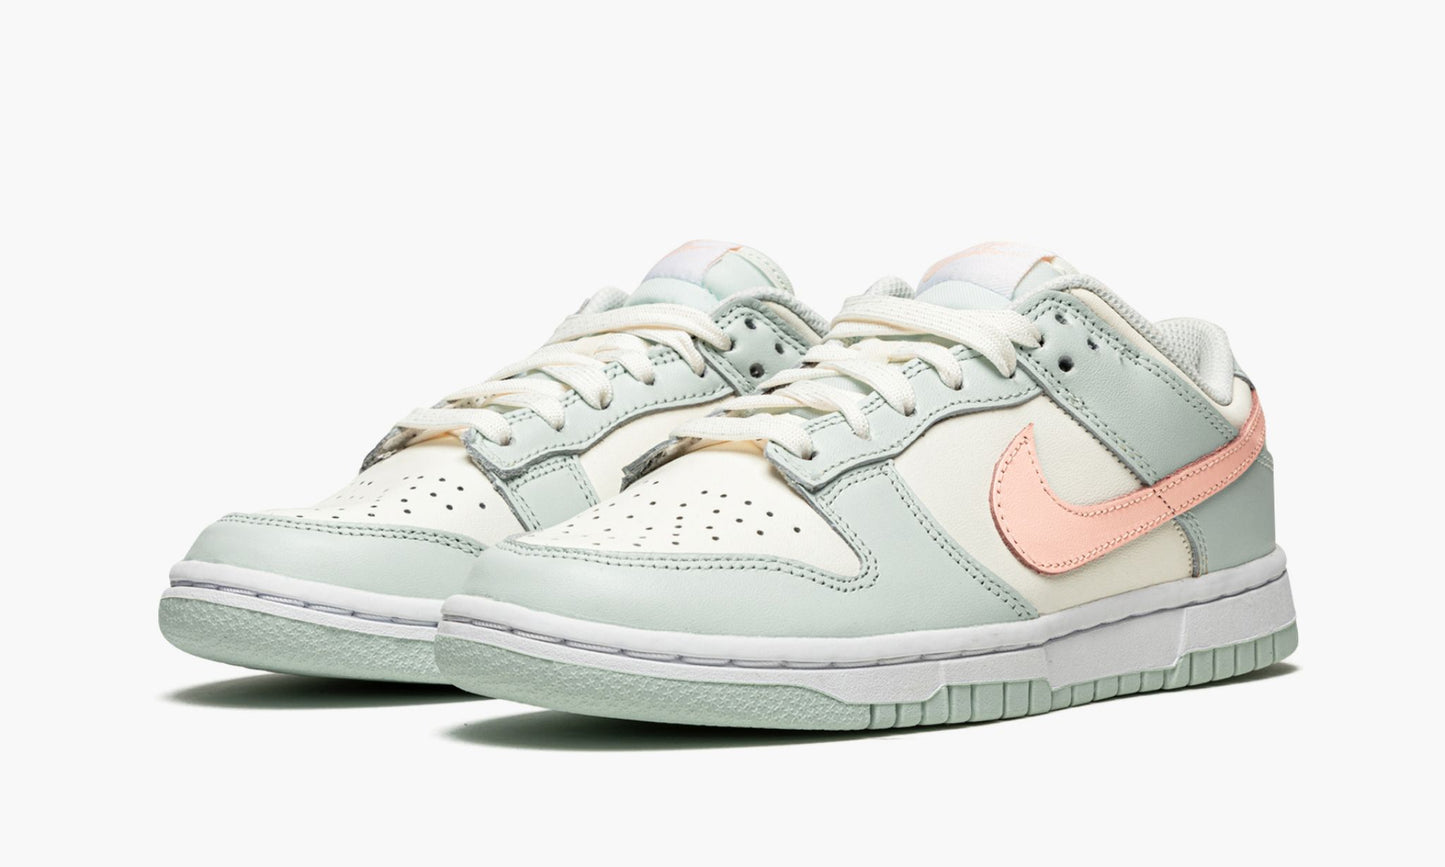 Dunk Low WMNS "Barely Green"